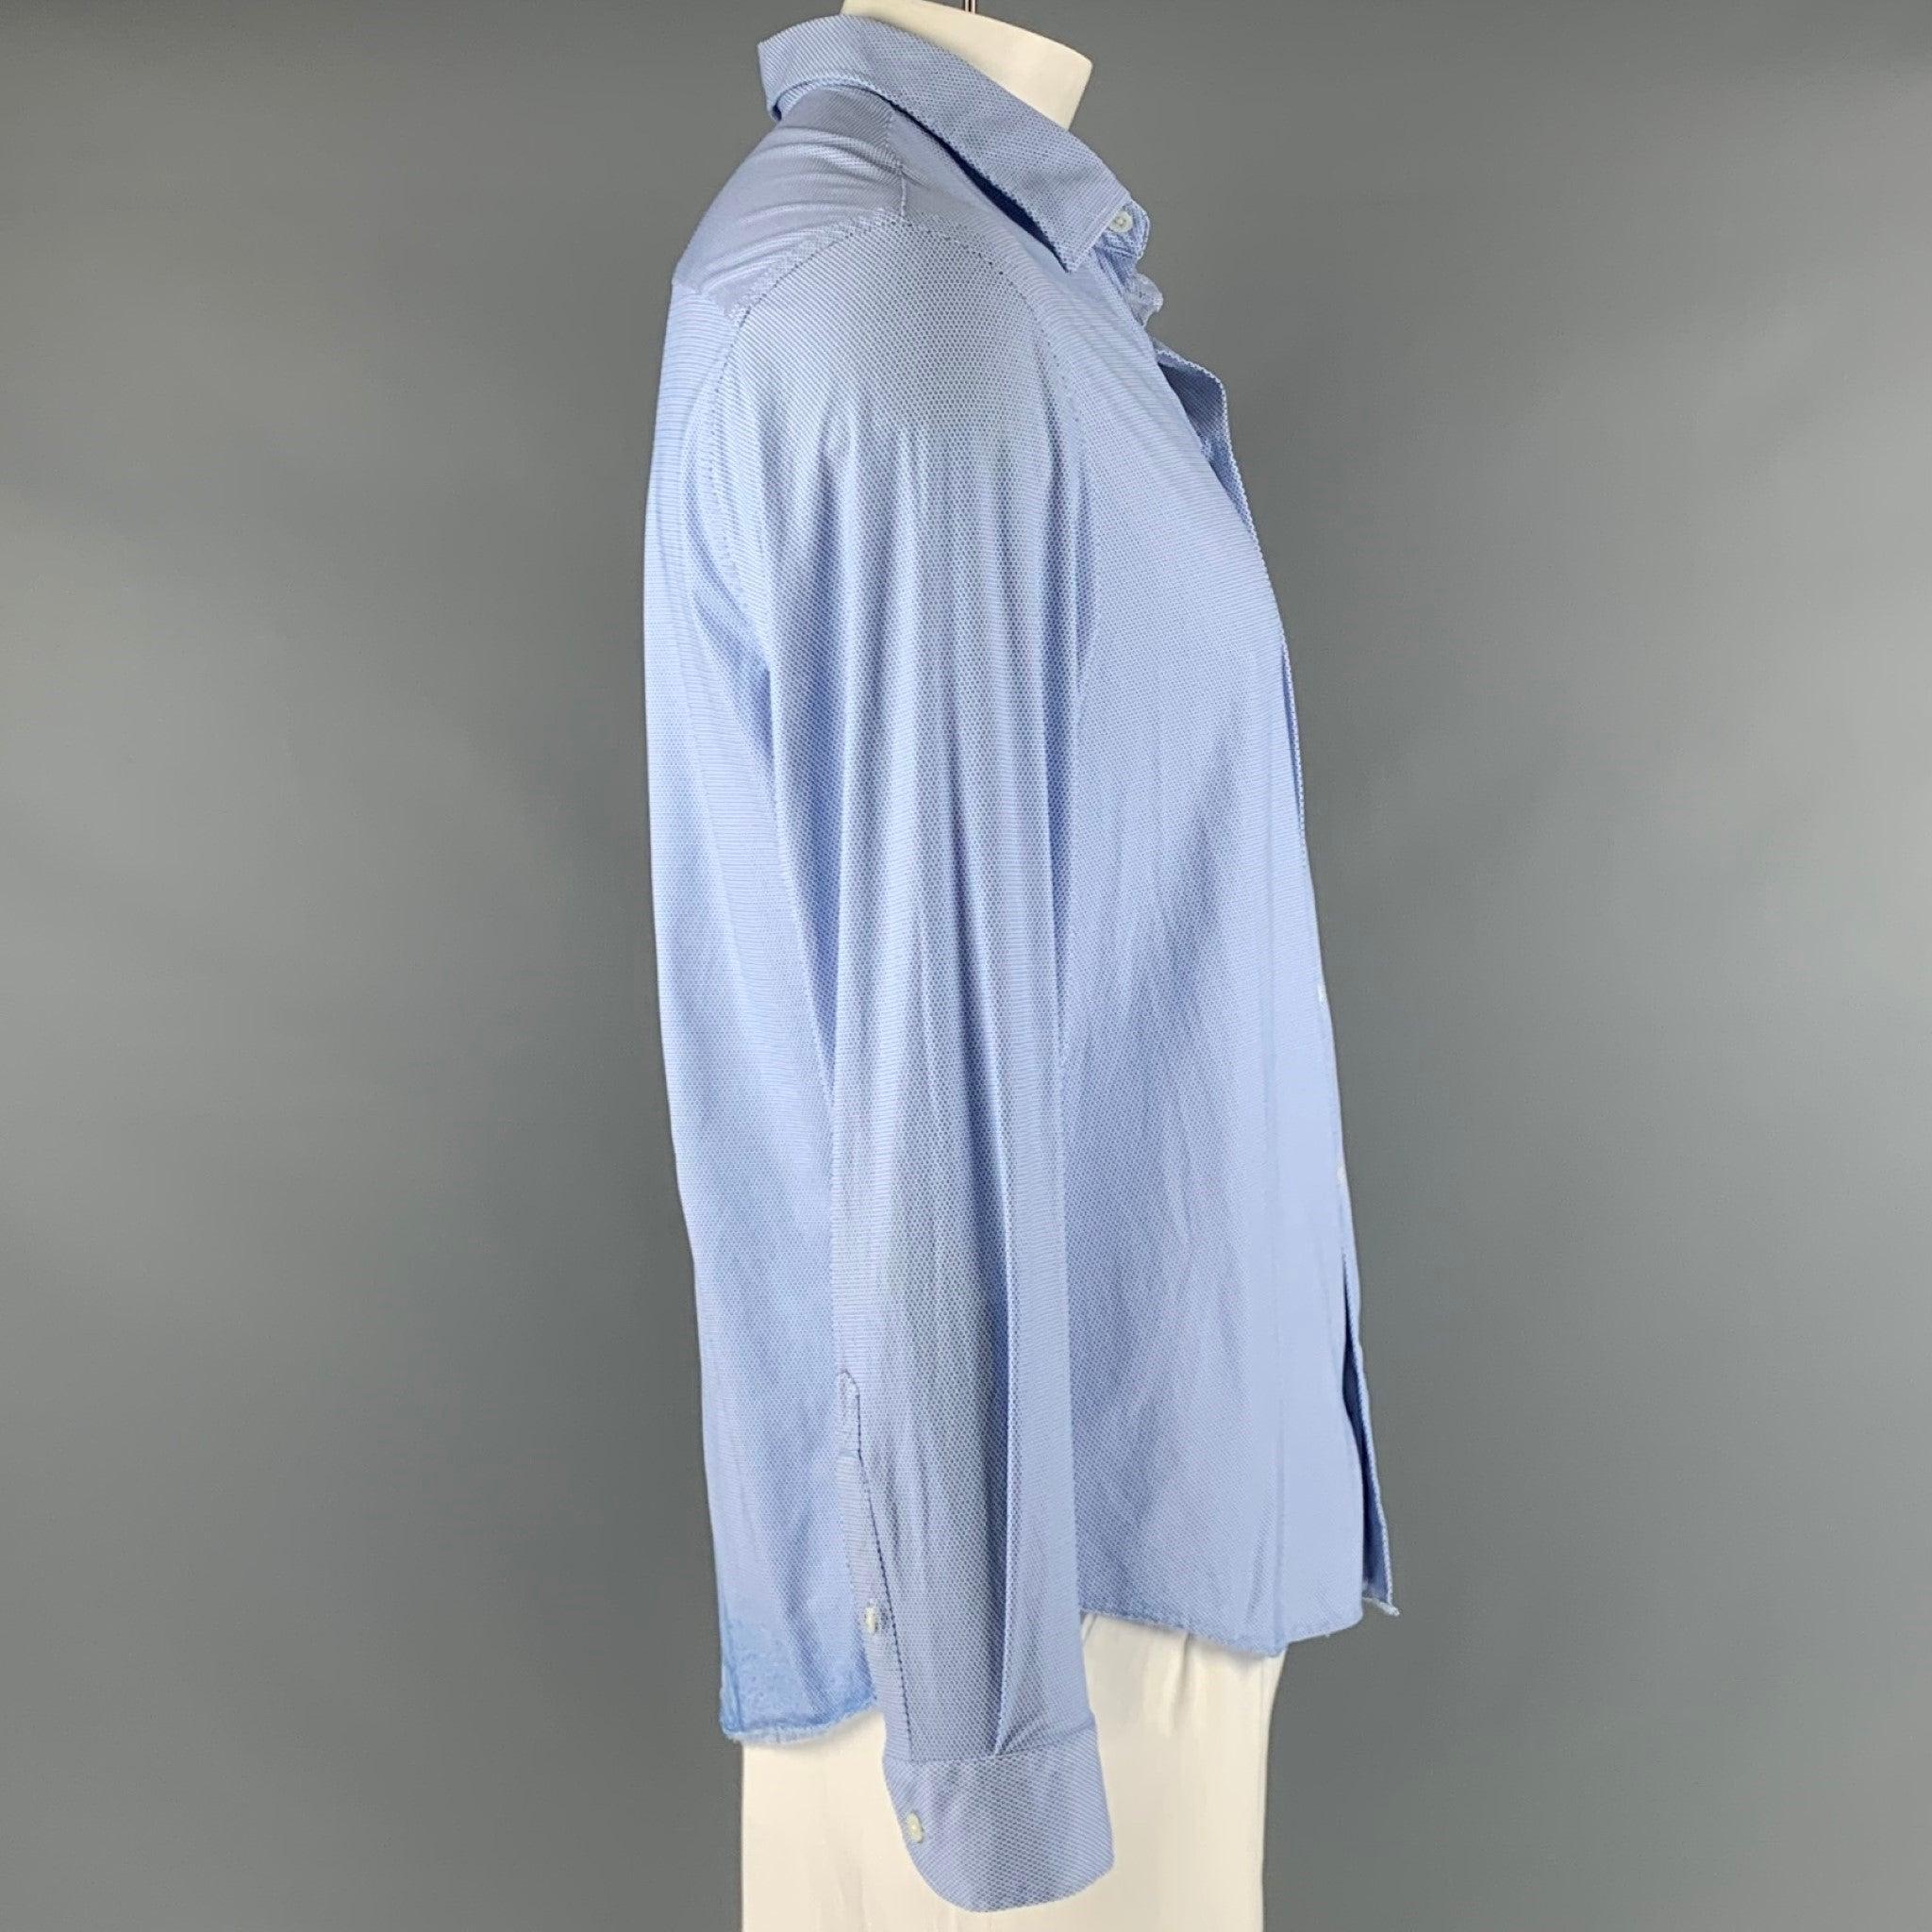 EMPORIO ARMANI long sleeve shirt
short in a stretchy white polyamide blend fabric featuring a blue nailhead pattern, spread collar, and button closure.Very Good Pre-Owned Condition. Moderate pilling at hem. 

Marked:   XXL 

Measurements: 
